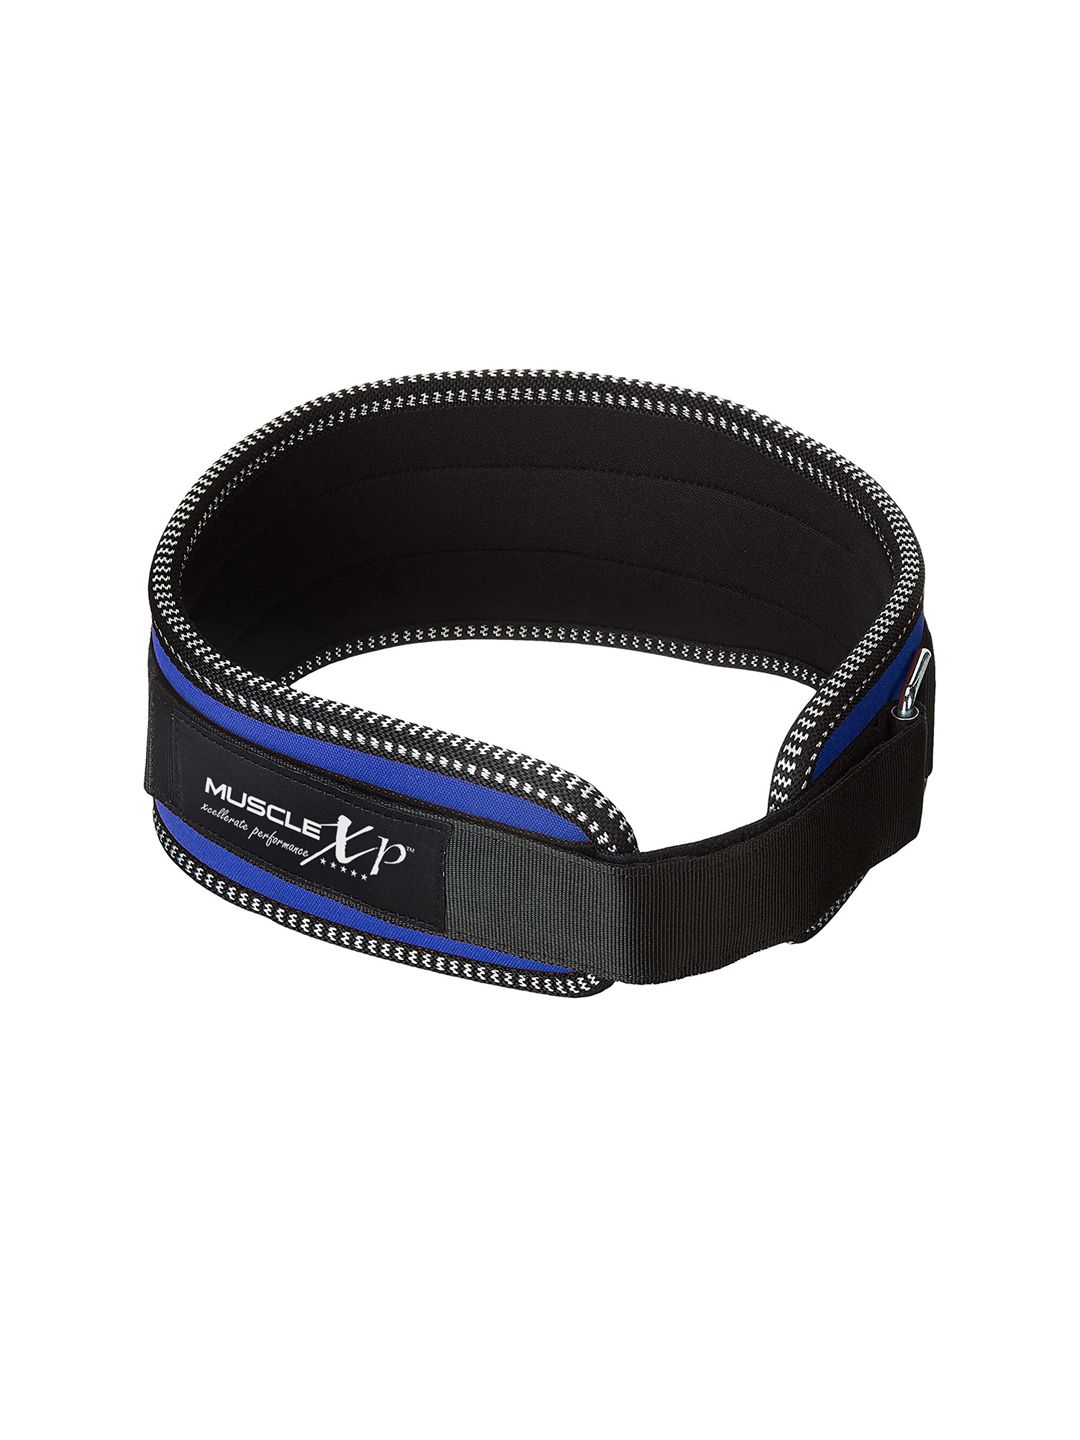 MUSCLEXP Blue Solid Weight Lifting Gym Belt Price in India